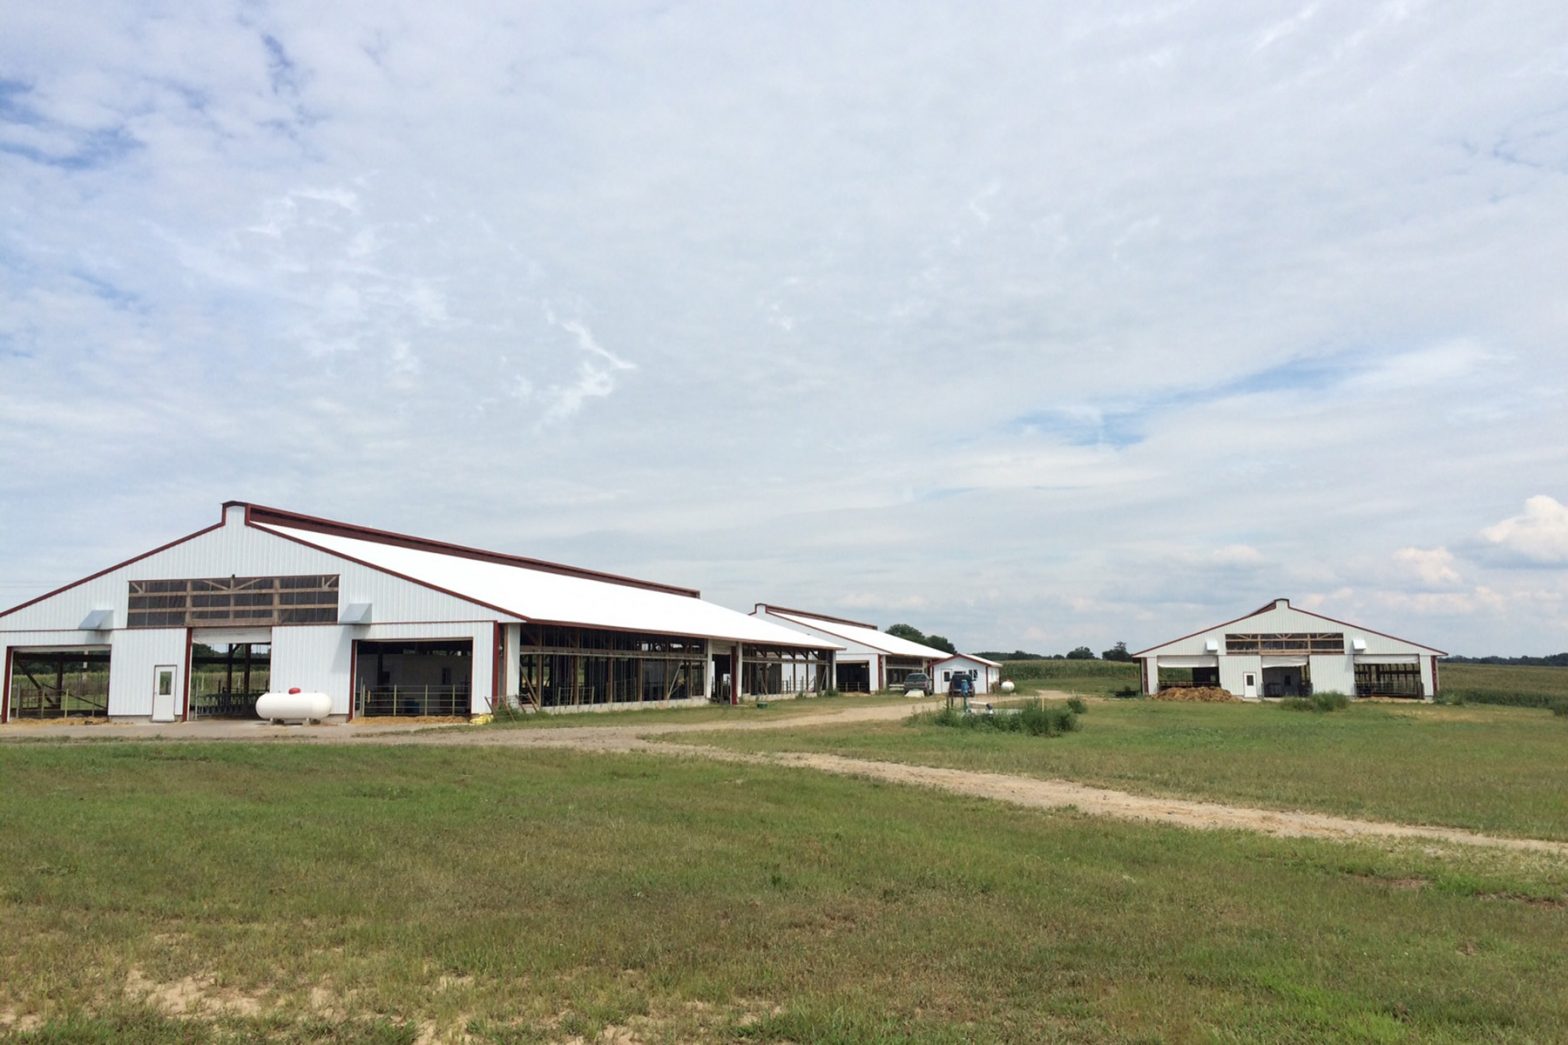 Homestead Dairy, LLC is managed by Brian Houin in Plymouth, Indiana. Their three calf barns are equipped with autofeeders and have the capacity to hold 200 calves each. A fourth is expected to be built next spring.